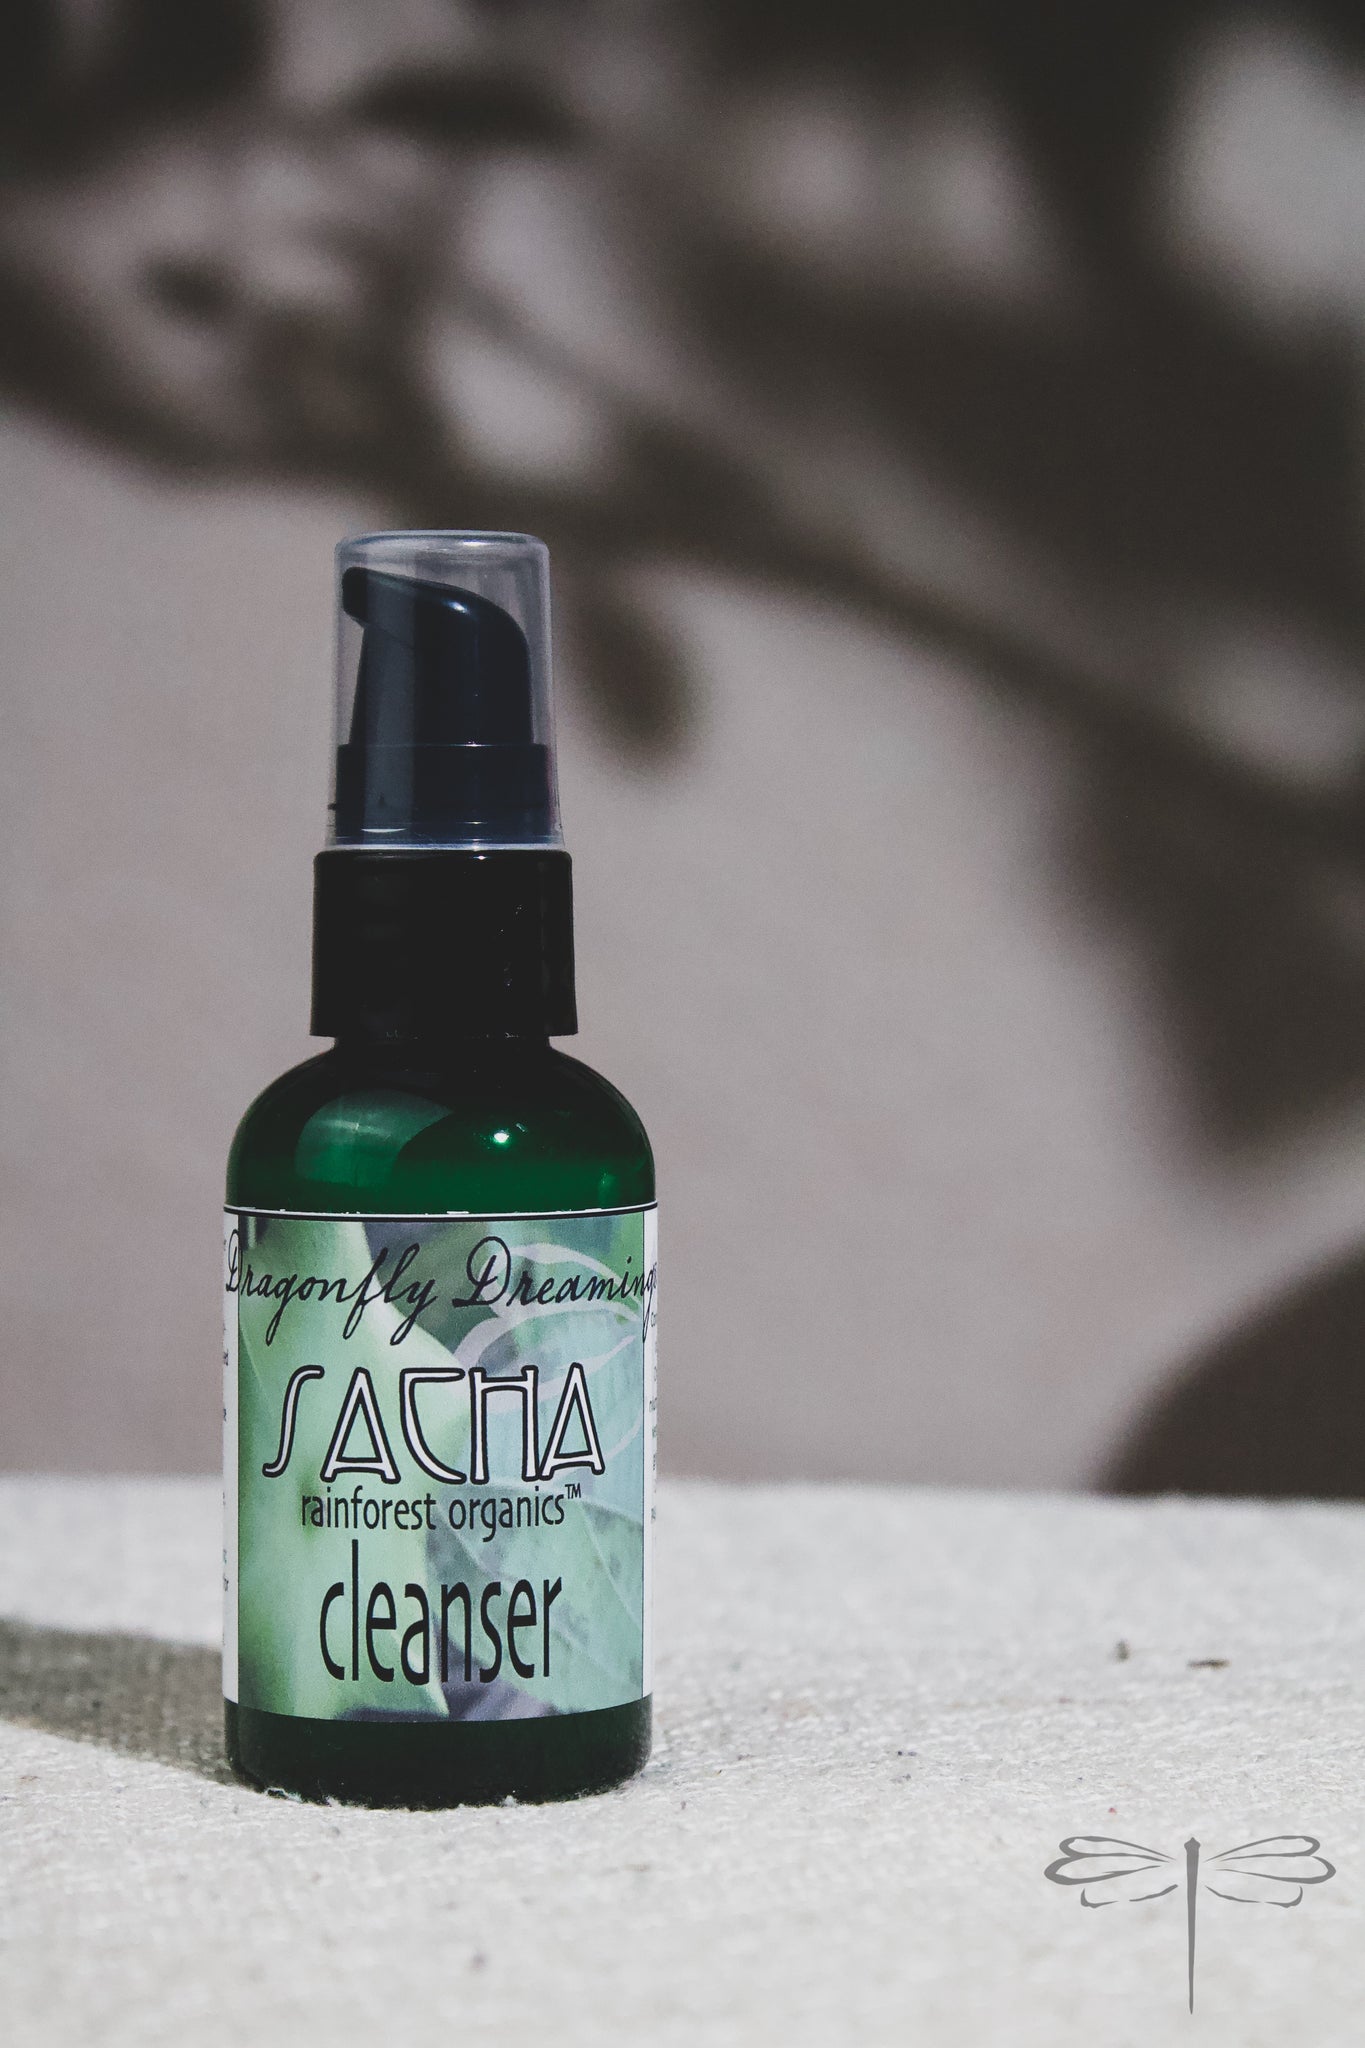 Sacha Facial Cleanser by Dragonfly Dreaming Organics